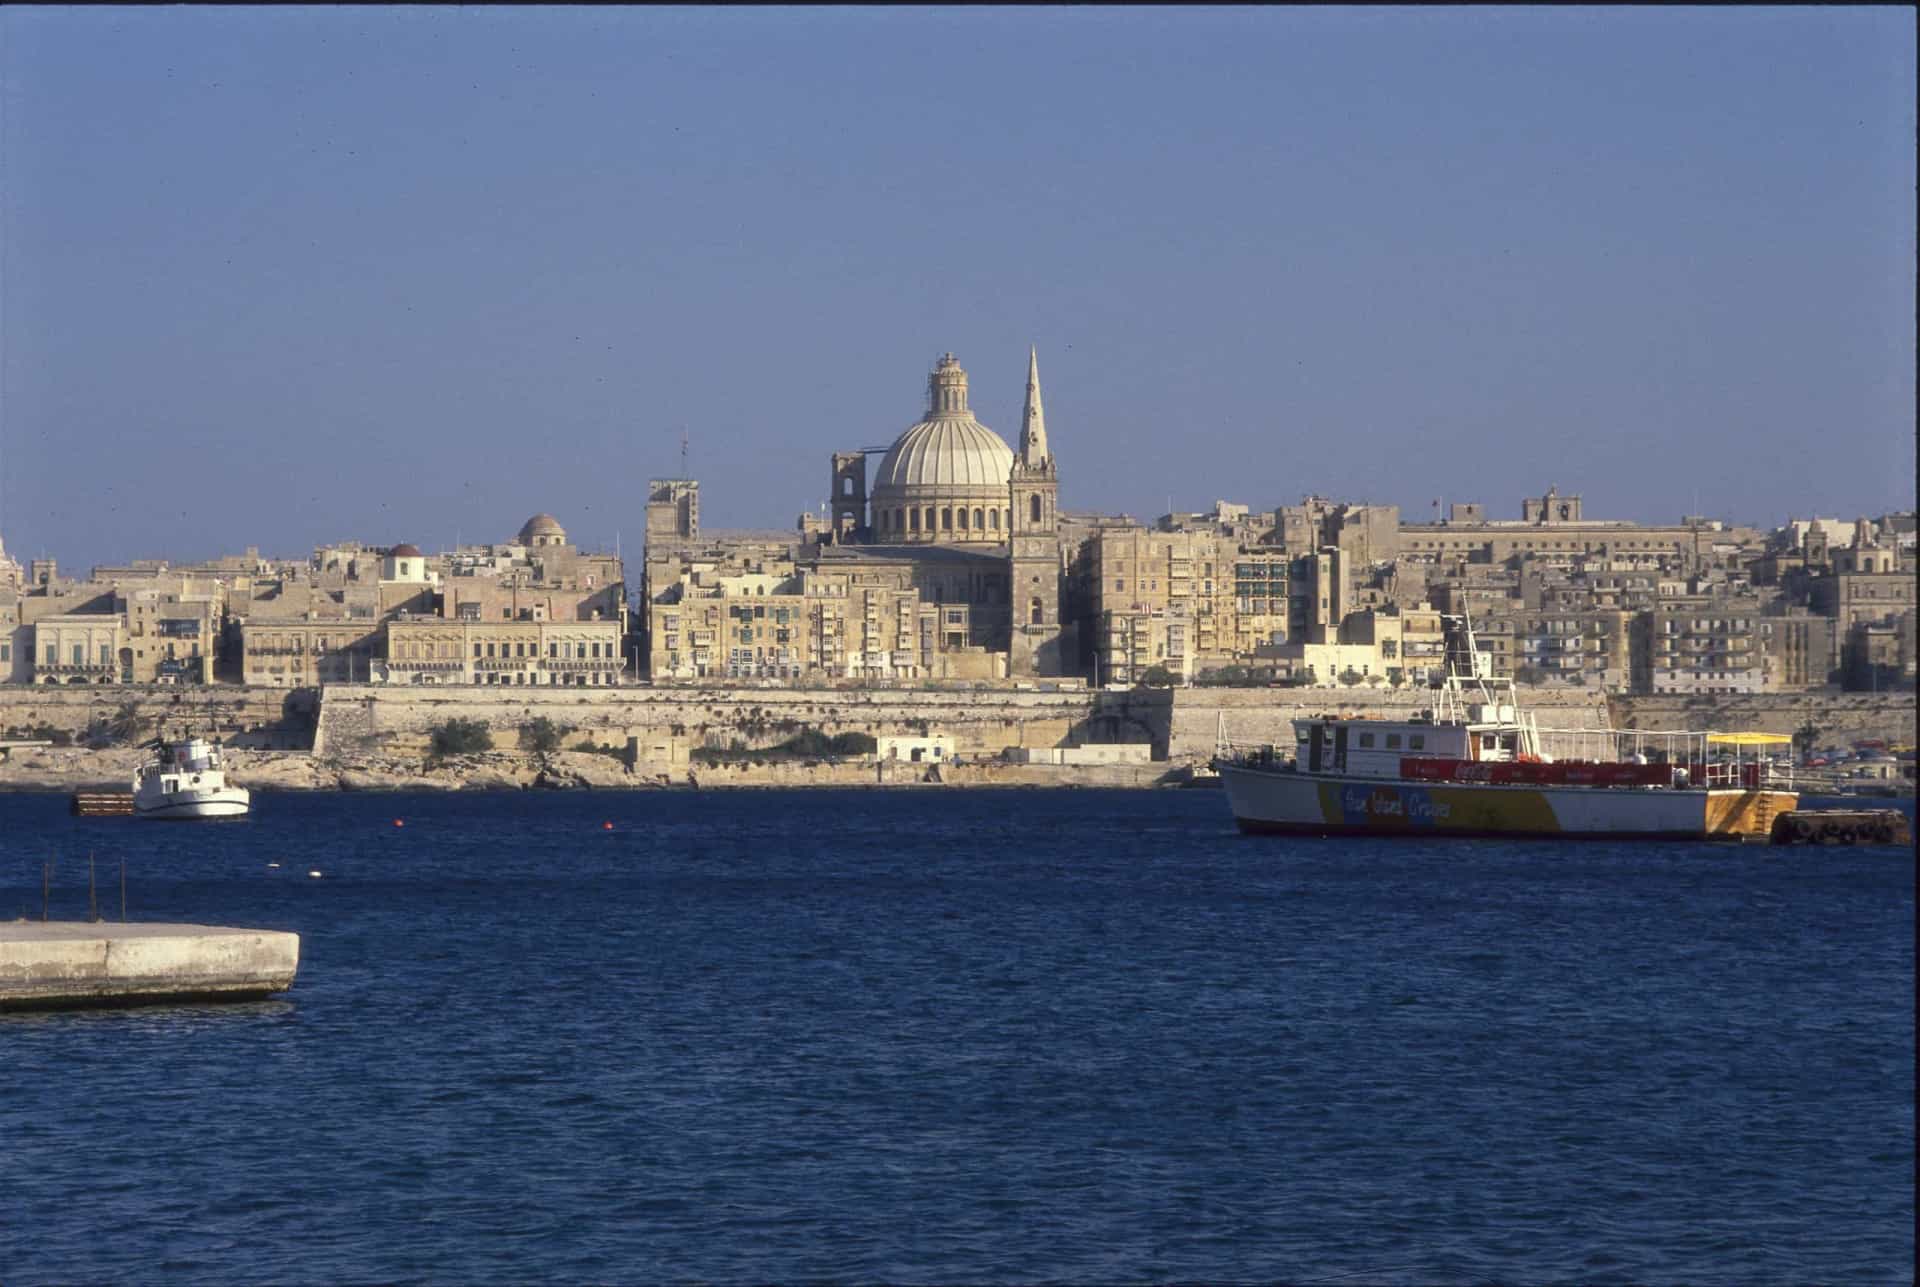 <p>Malta's exquisite architecture and clear blue water has attracted many visitors over the years, and Americans were no different. </p>